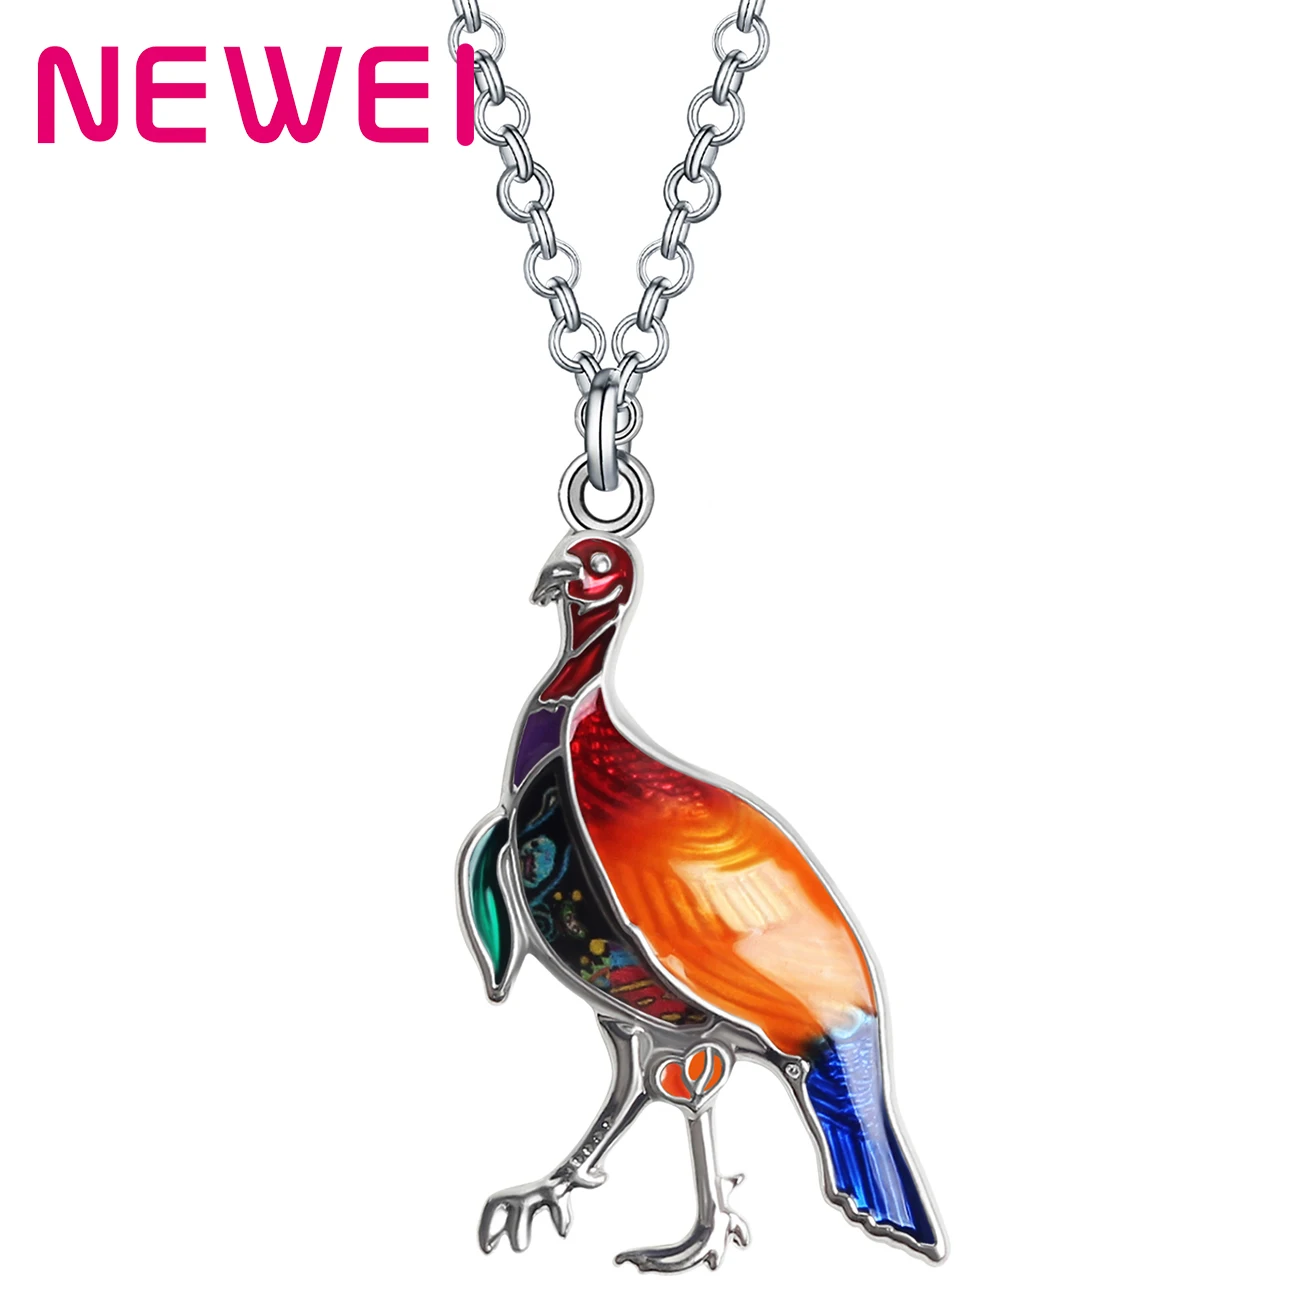 

Thanksgiving Enamel Alloy Floral Cute Turkey Chicken Necklace Pendant Trendy Animal Chain Jewelry For Women Girl Teen Charm Gift, Blue brown black multicolor red purple